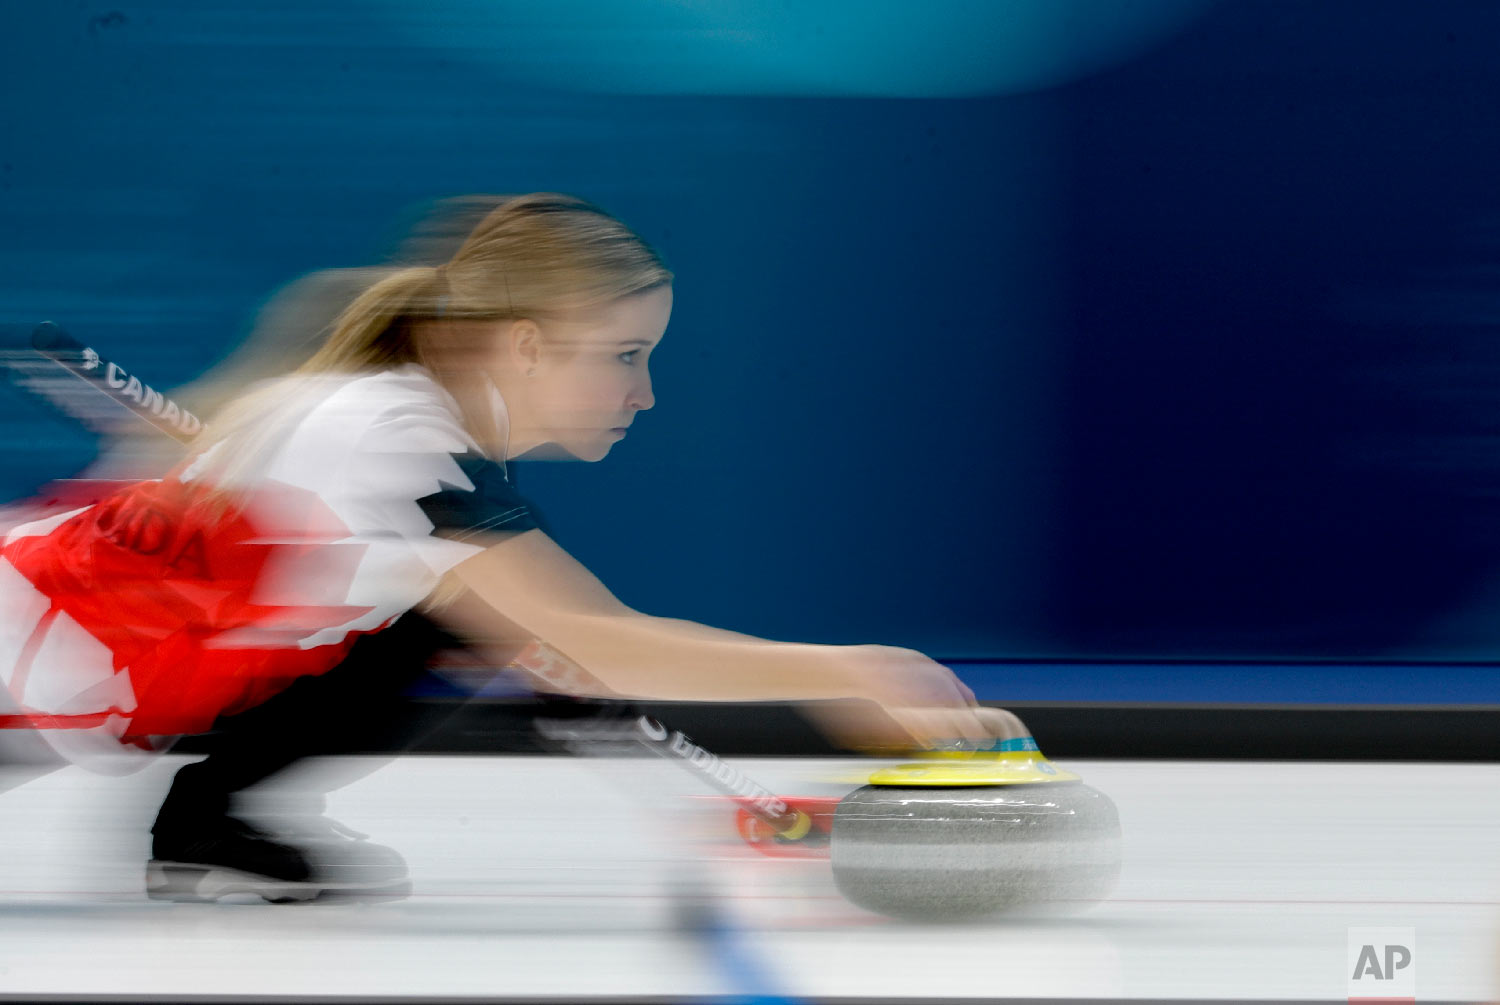  Canada's Kaitlyn Lawes throws a stone during a mixed doubles curling match against Olympic Athletes from Russia Anastasia Bryzgalova and Aleksandr Krushelnitckii at the 2018 Winter Olympics in Gangneung, South Korea, Saturday, Feb. 10, 2018. (AP Pho